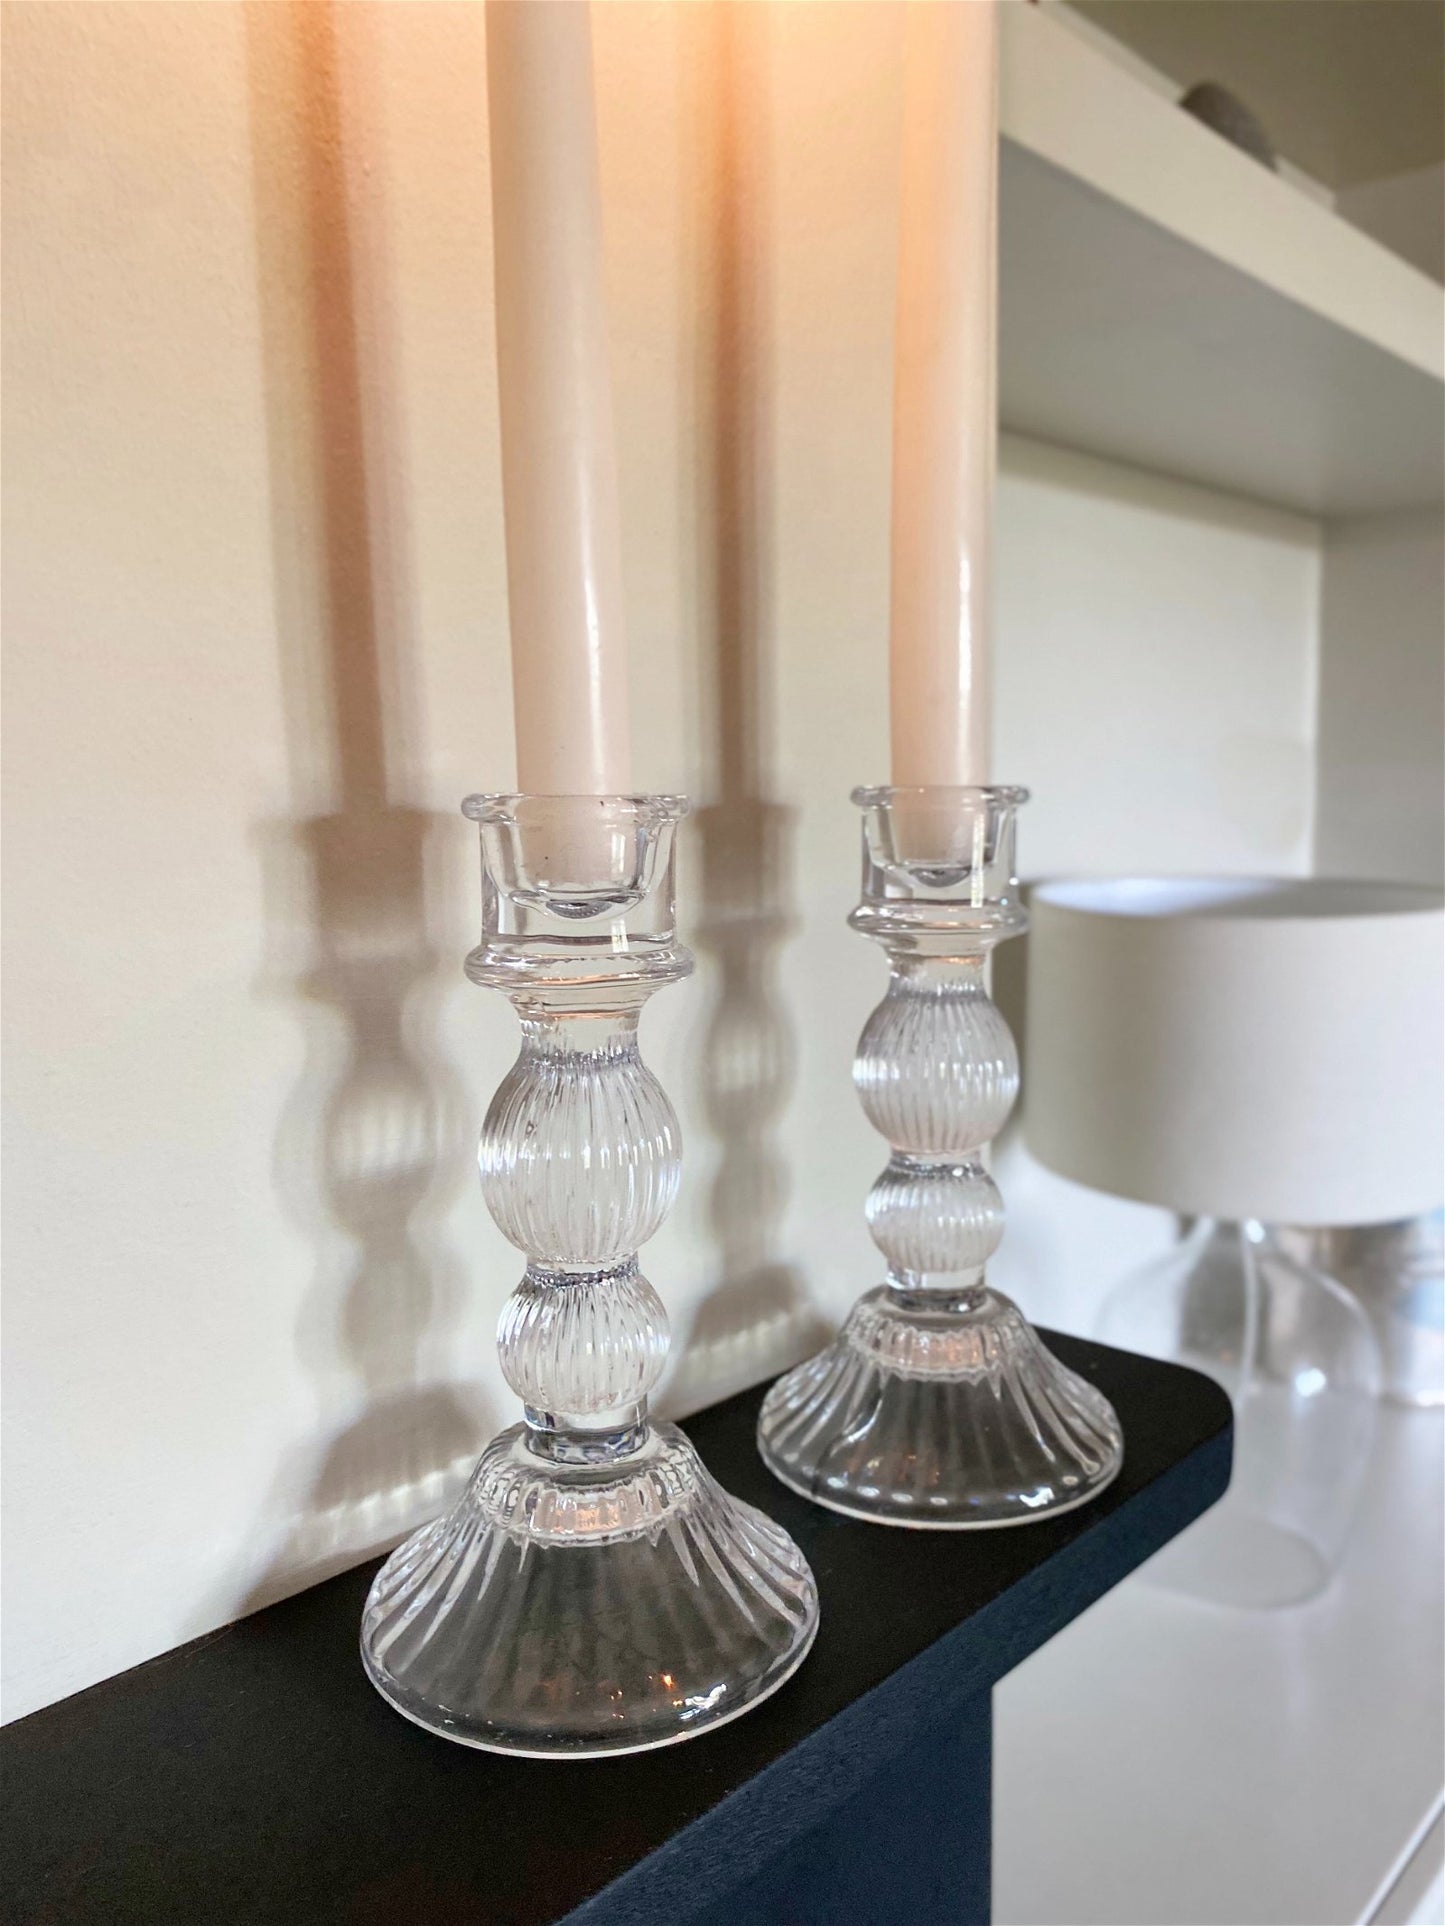 Pair of Glass Taper Candle Holders Clear - a Cheeky Plant